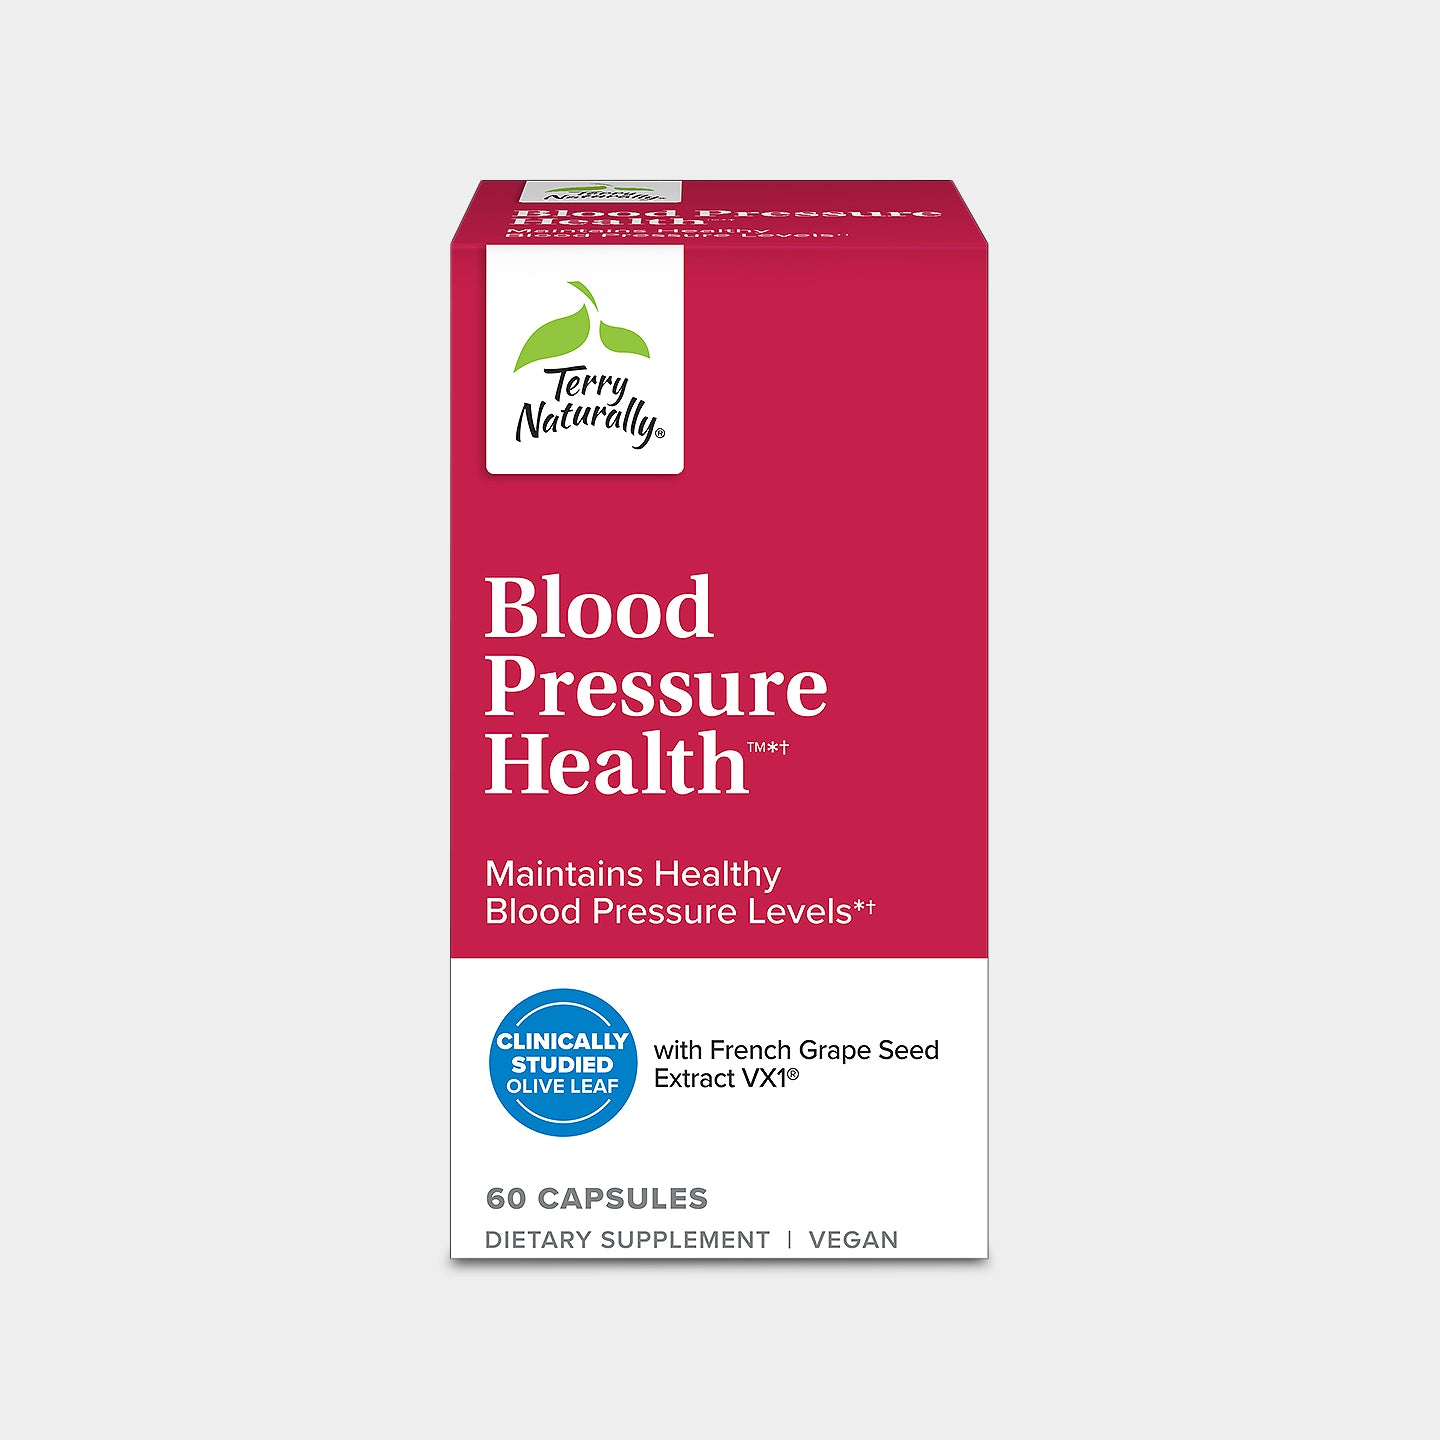 Terry Naturally Blood Pressure Health A1